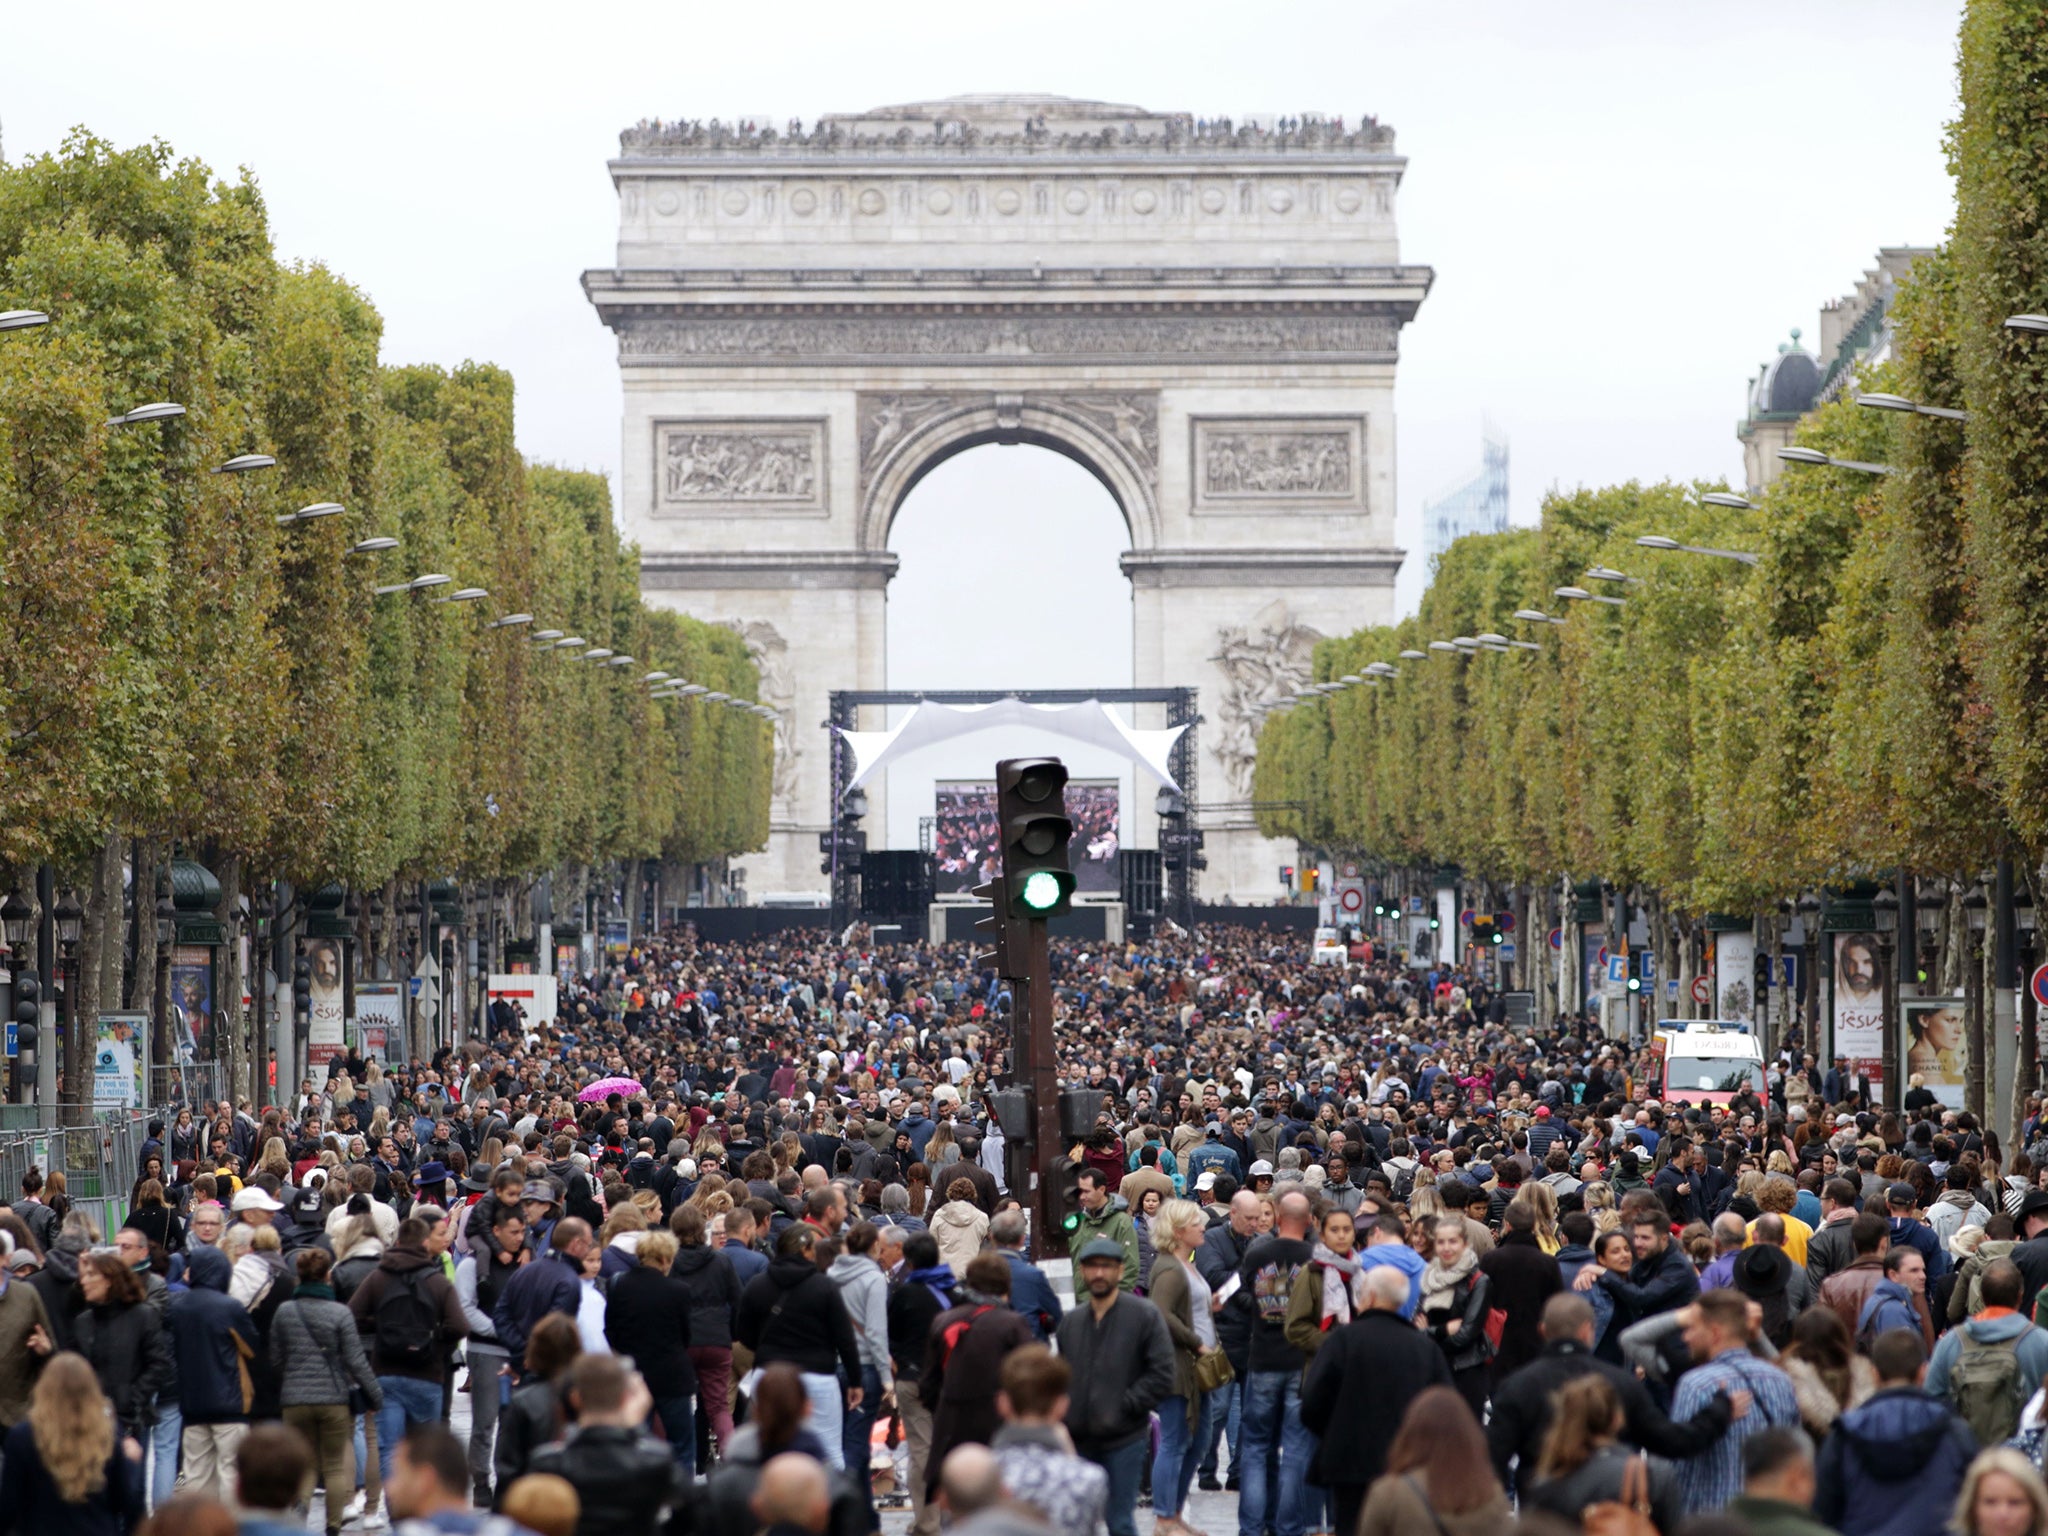 Pedestrians walking along the Champs Elysees during the car free day in Paris